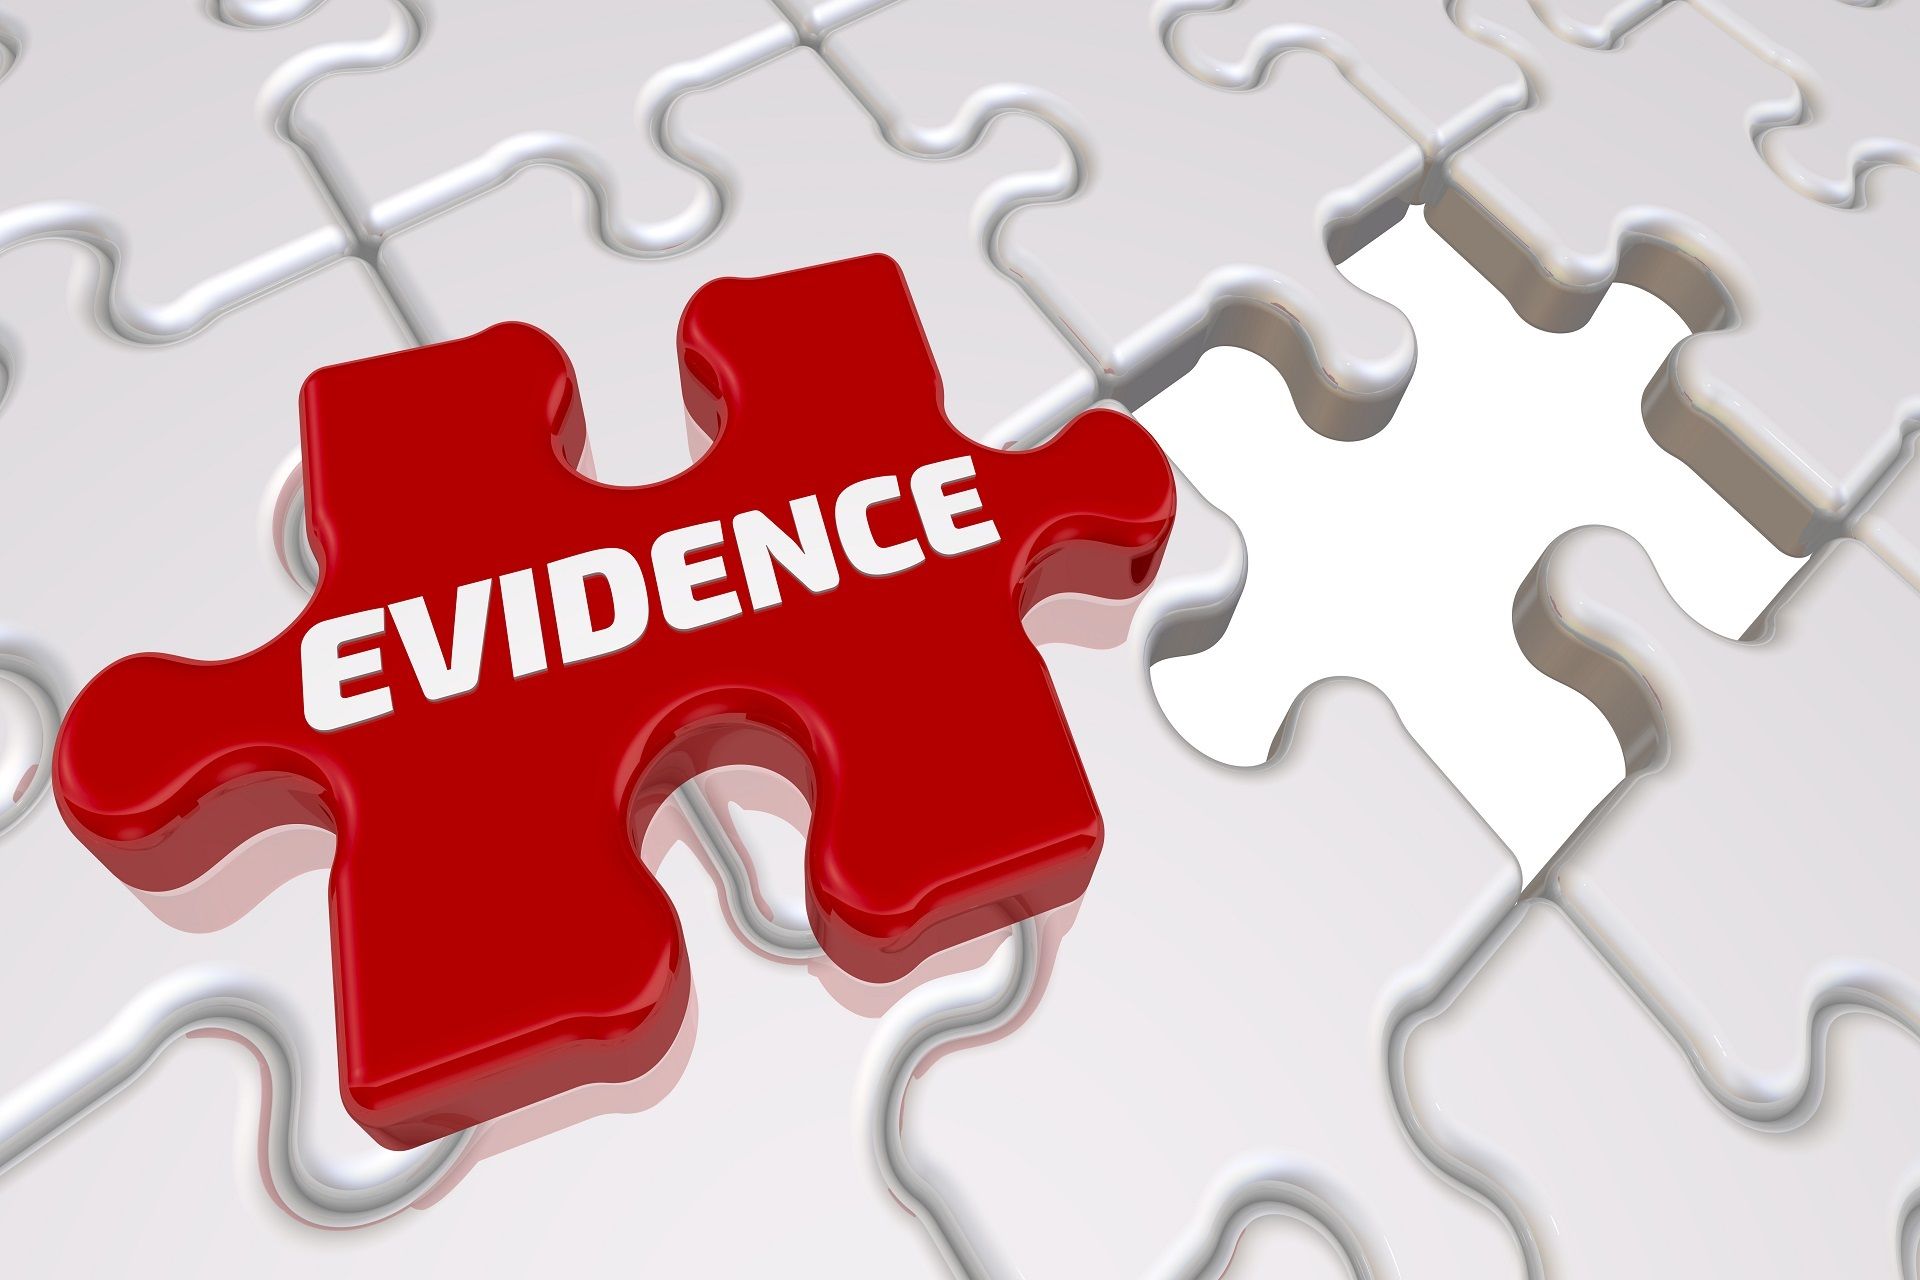 What Type of Demonstrative Evidence?